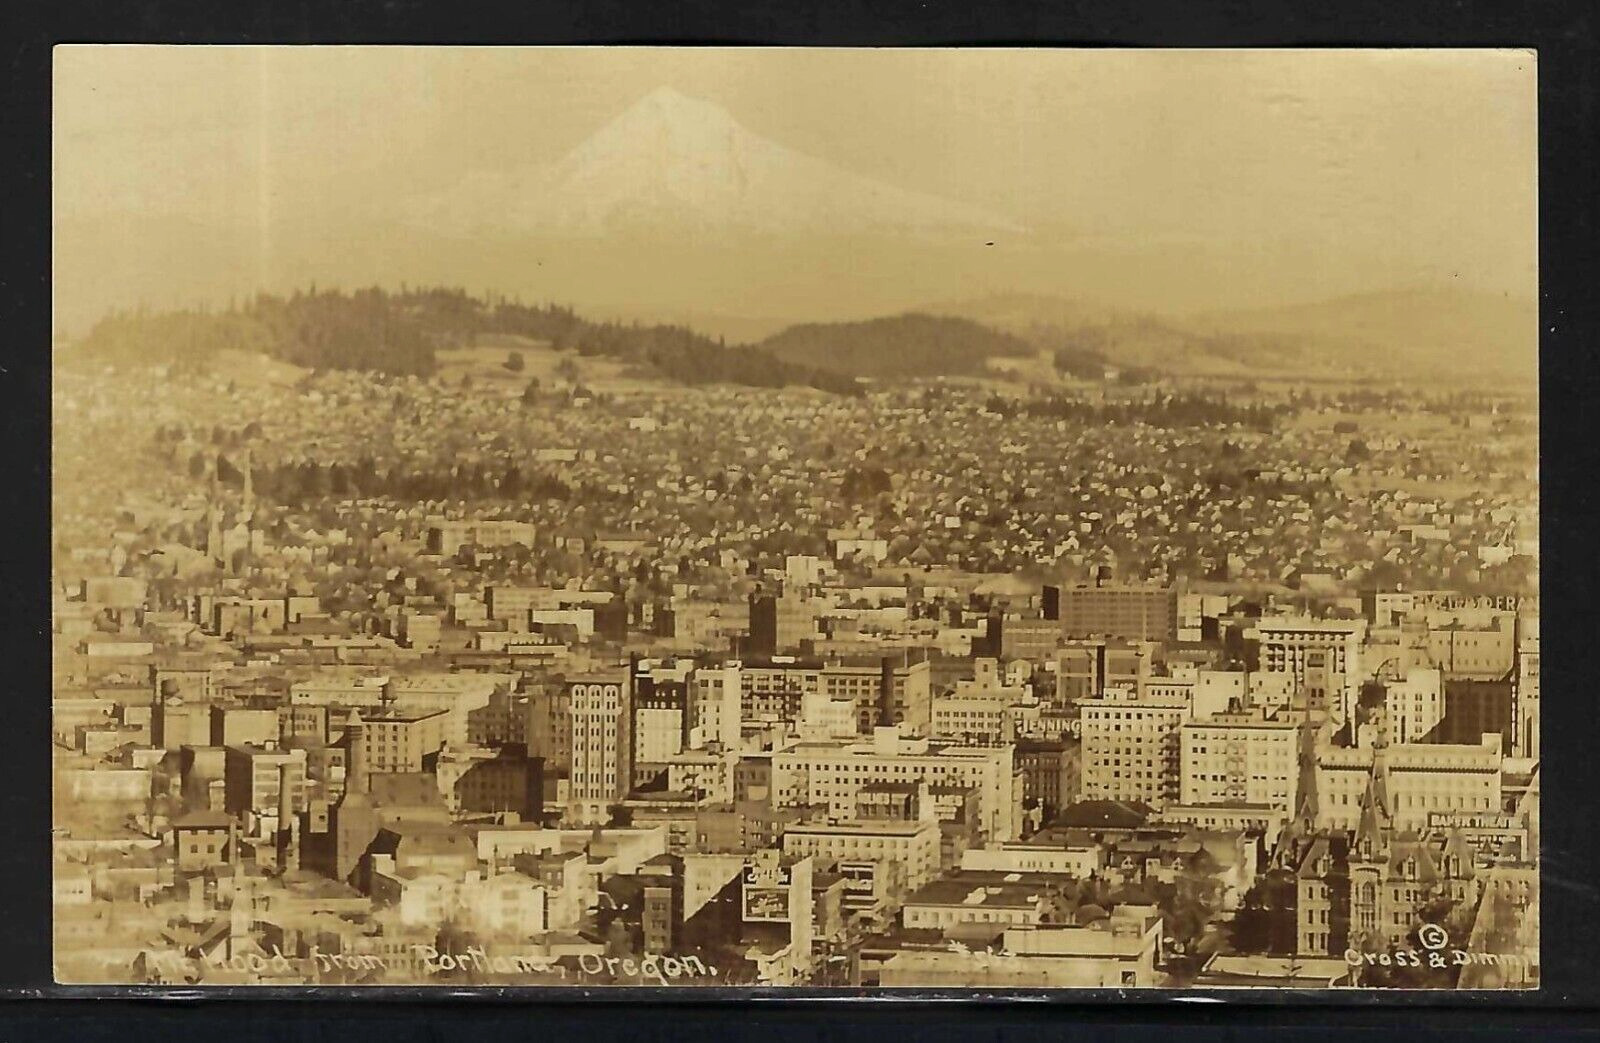 RPPC - MT HOOD FROM PORTLAND OR - CROSS & DIMMITT © - UNPOSTED - AZO CARD